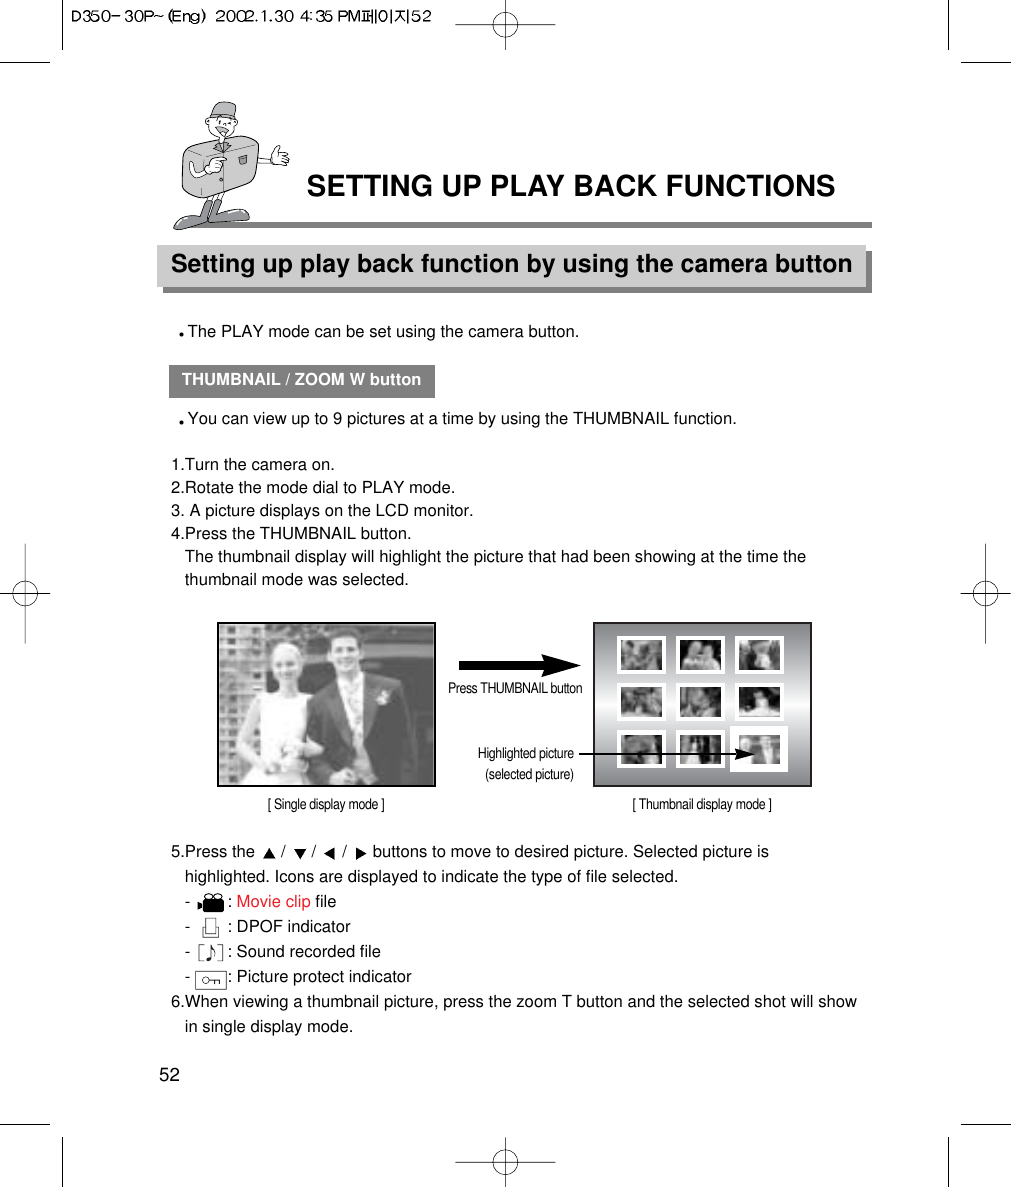 SETTING UP PLAY BACK FUNCTIONSSetting up play back function by using the camera button52THUMBNAIL / ZOOM W buttonYou can view up to 9 pictures at a time by using the THUMBNAIL function.1.Turn the camera on.2.Rotate the mode dial to PLAY mode.3. A picture displays on the LCD monitor.4.Press the THUMBNAIL button.The thumbnail display will highlight the picture that had been showing at the time thethumbnail mode was selected.5.Press the  /  /  /  buttons to move to desired picture. Selected picture ishighlighted. Icons are displayed to indicate the type of file selected.-        : Movie clip file-        : DPOF indicator-        : Sound recorded file-        : Picture protect indicator 6.When viewing a thumbnail picture, press the zoom T button and the selected shot will showin single display mode.Press THUMBNAIL button[ Single display mode ]Highlighted picture(selected picture)[ Thumbnail display mode ]The PLAY mode can be set using the camera button. 